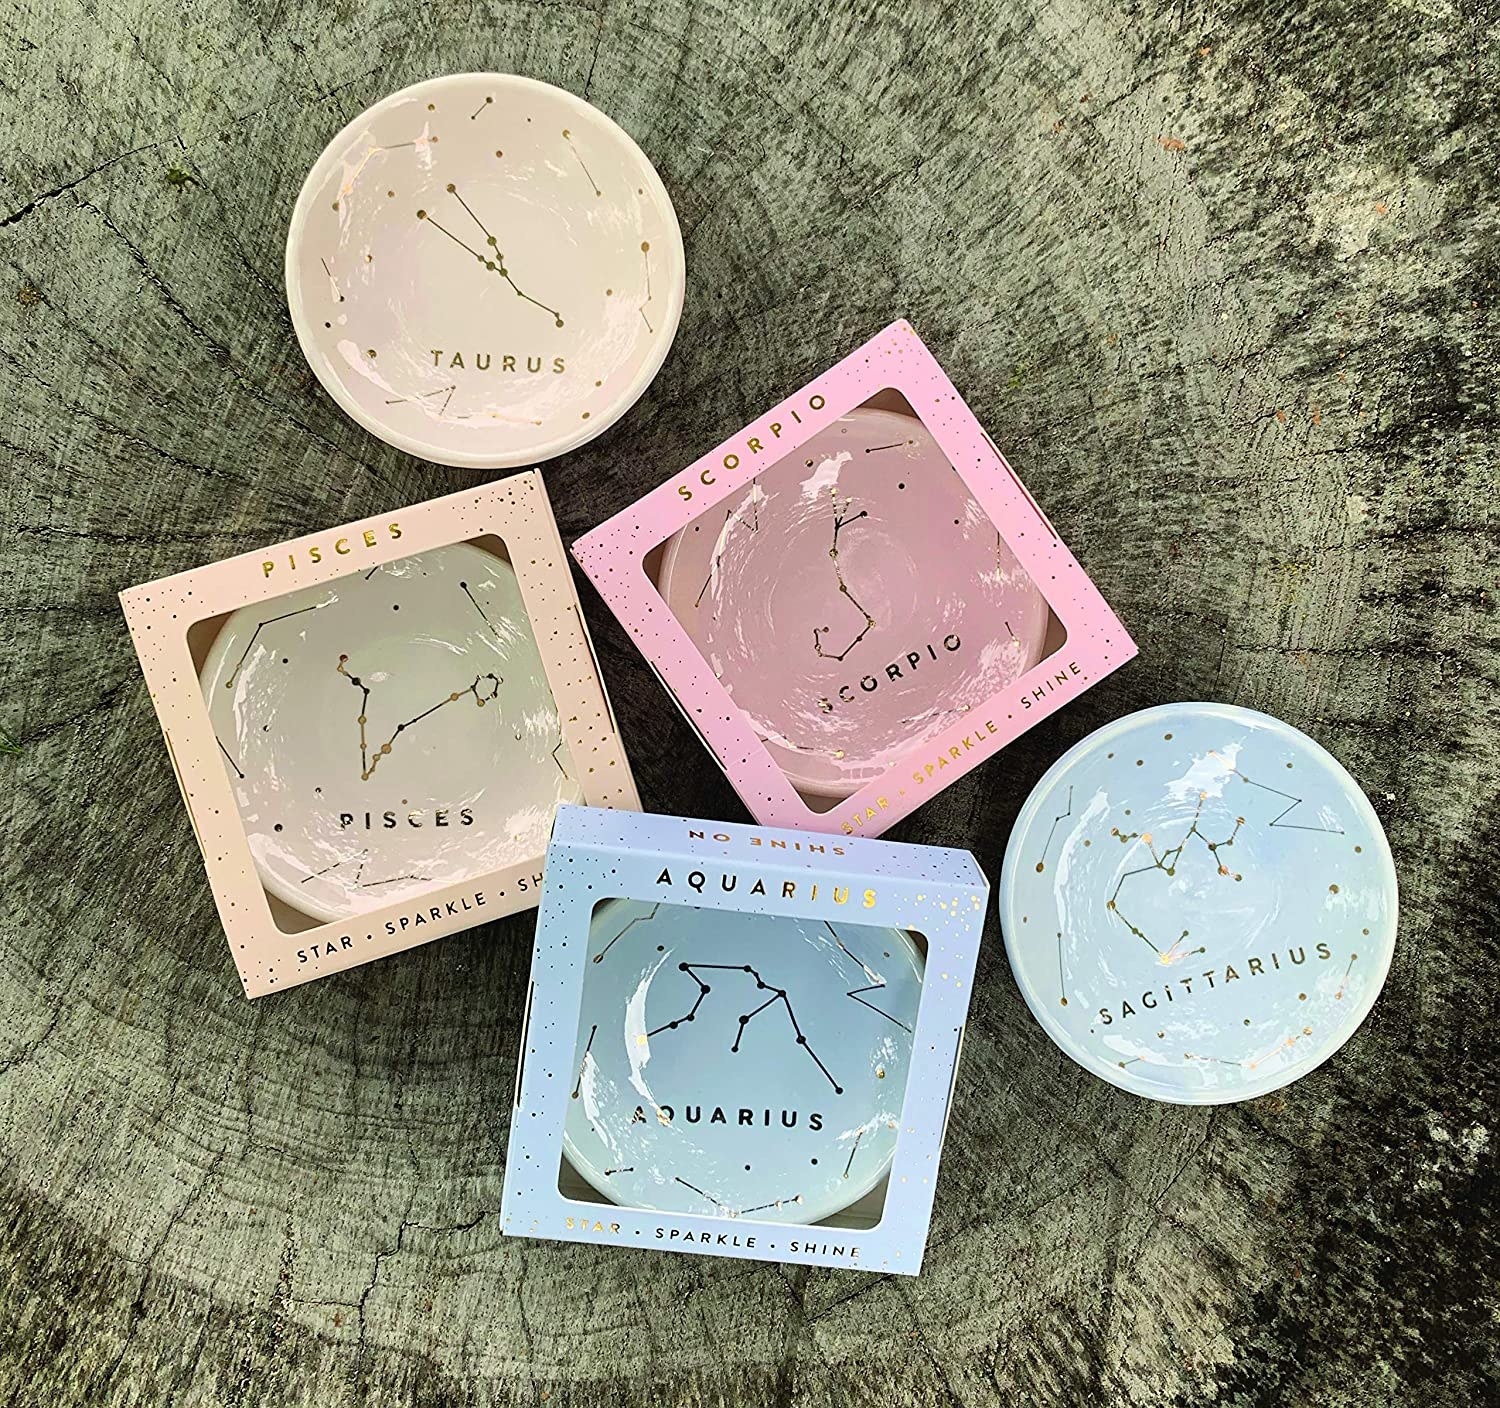 the pastel trinket dishes with different horoscopes 